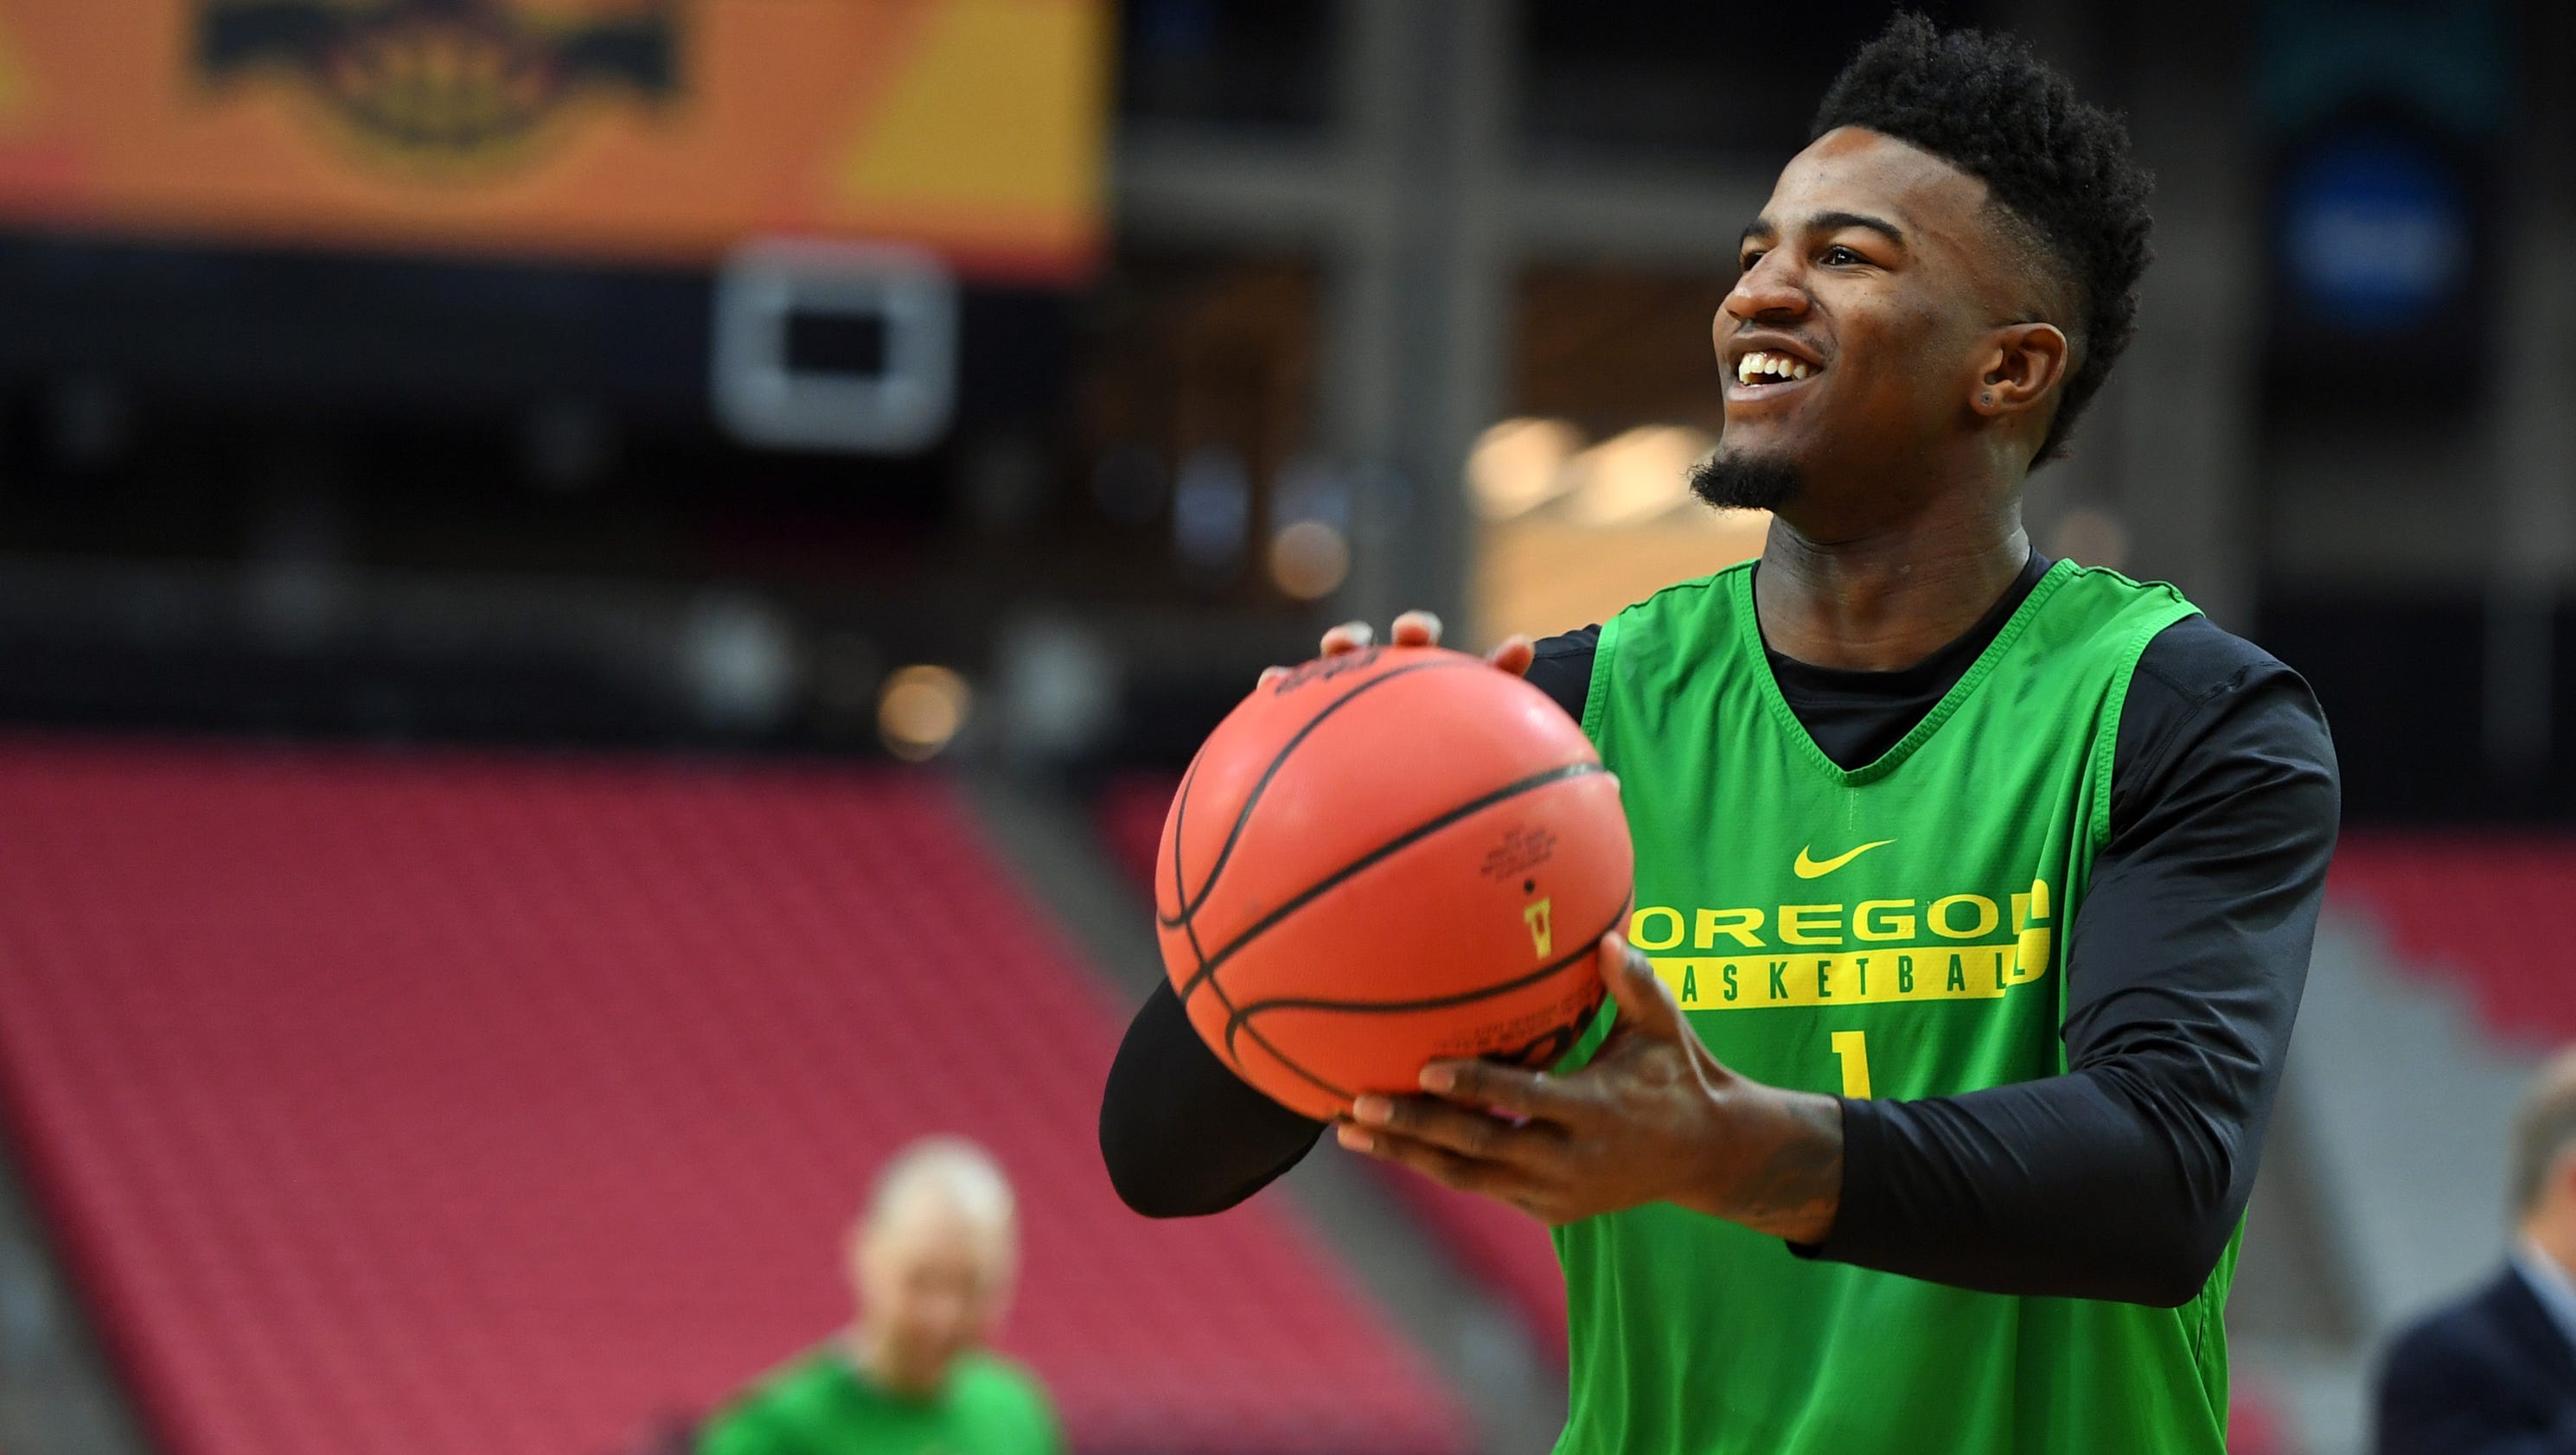 Jordan Bell is third Oregon Ducks player to declare for this year's NBA draft3200 x 1680